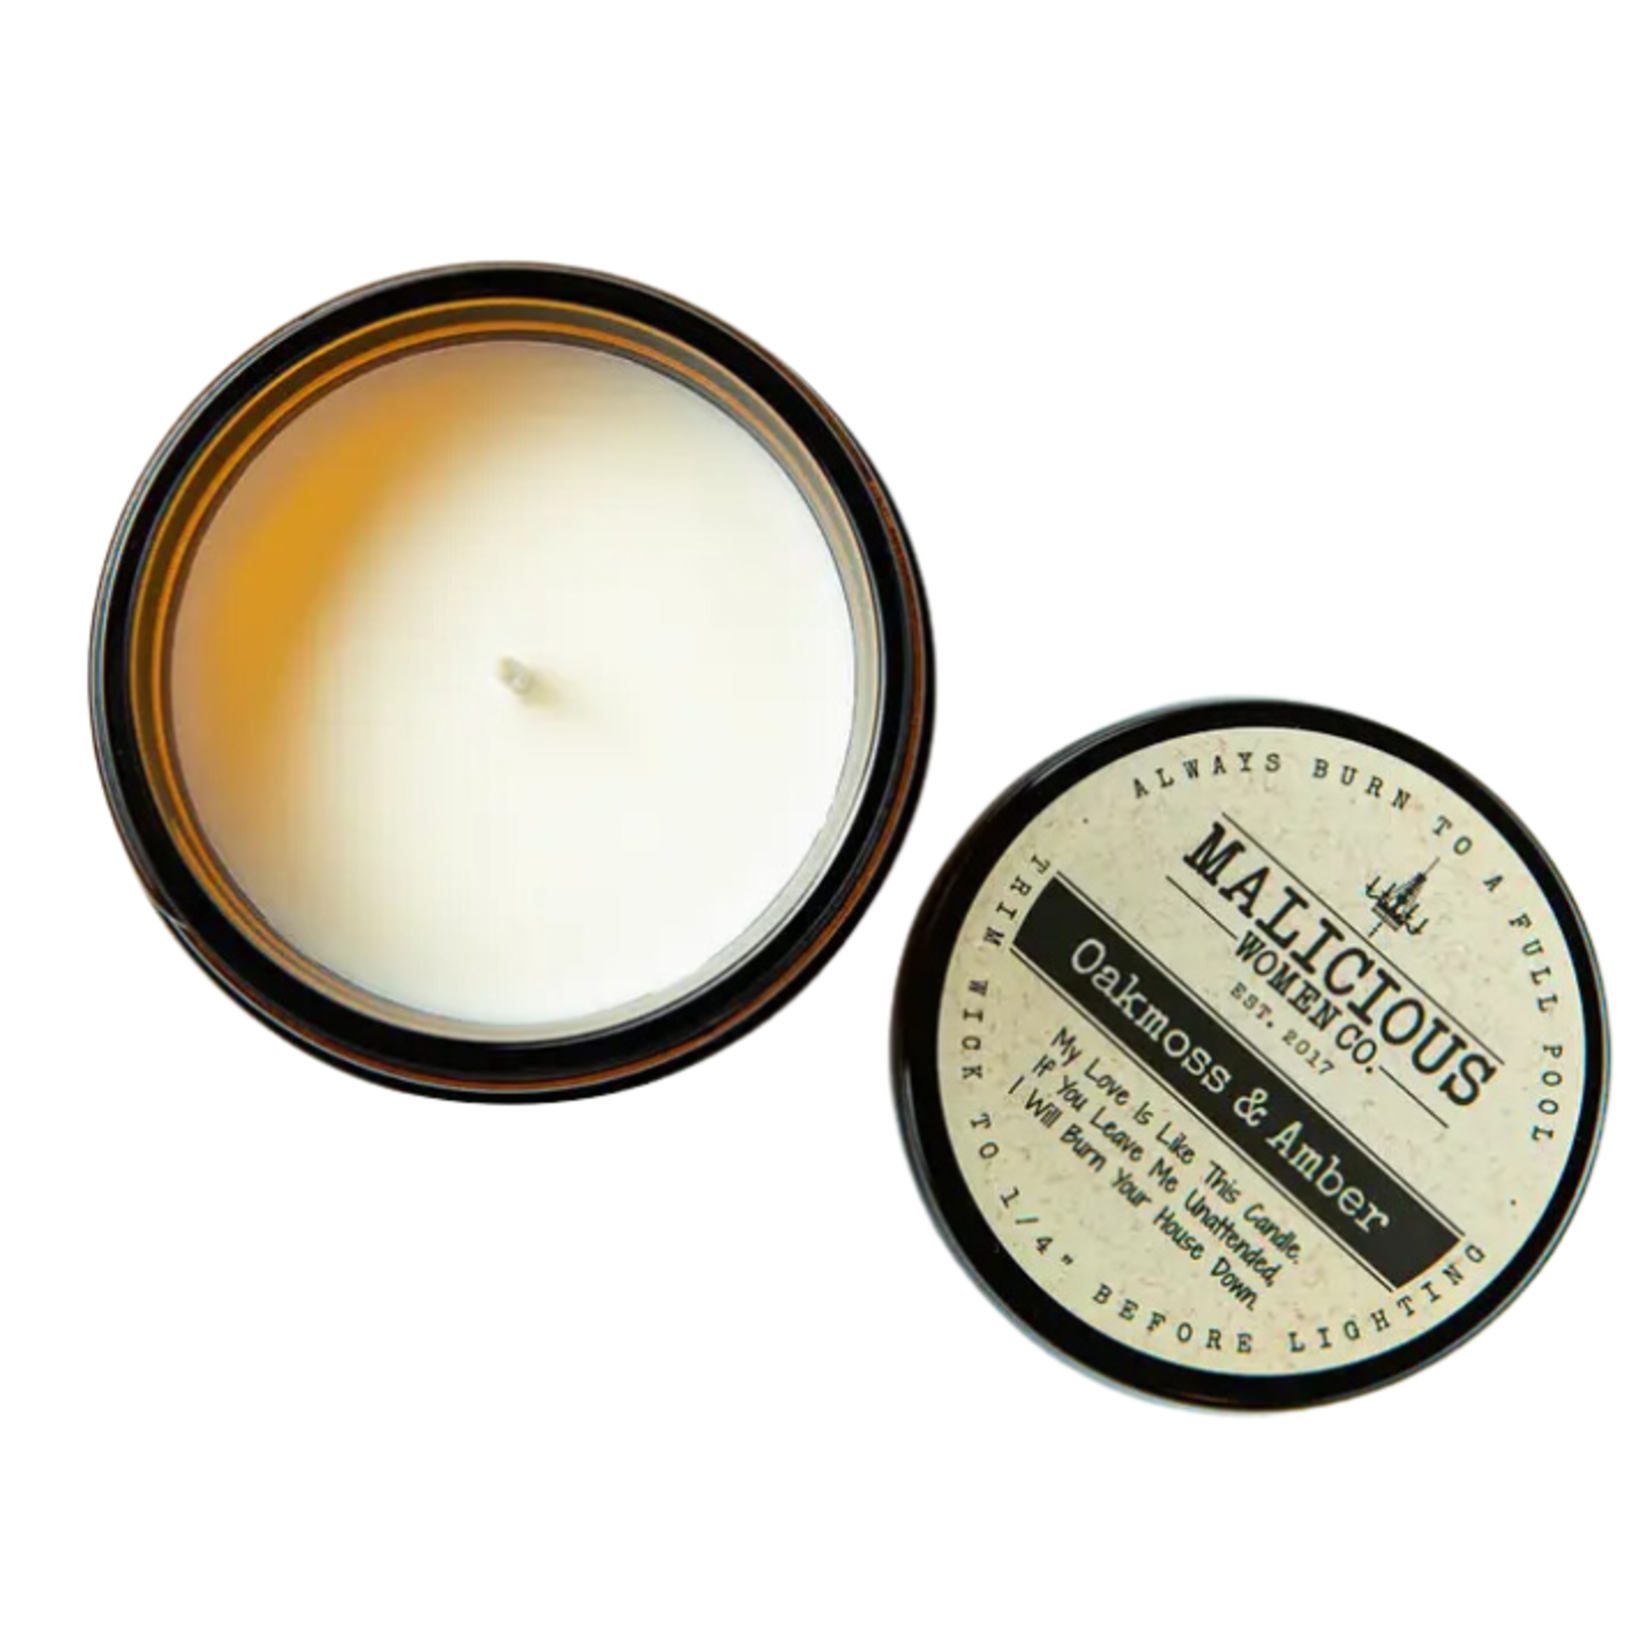 Malicious Woman Candle Co. All the Fucks Candle